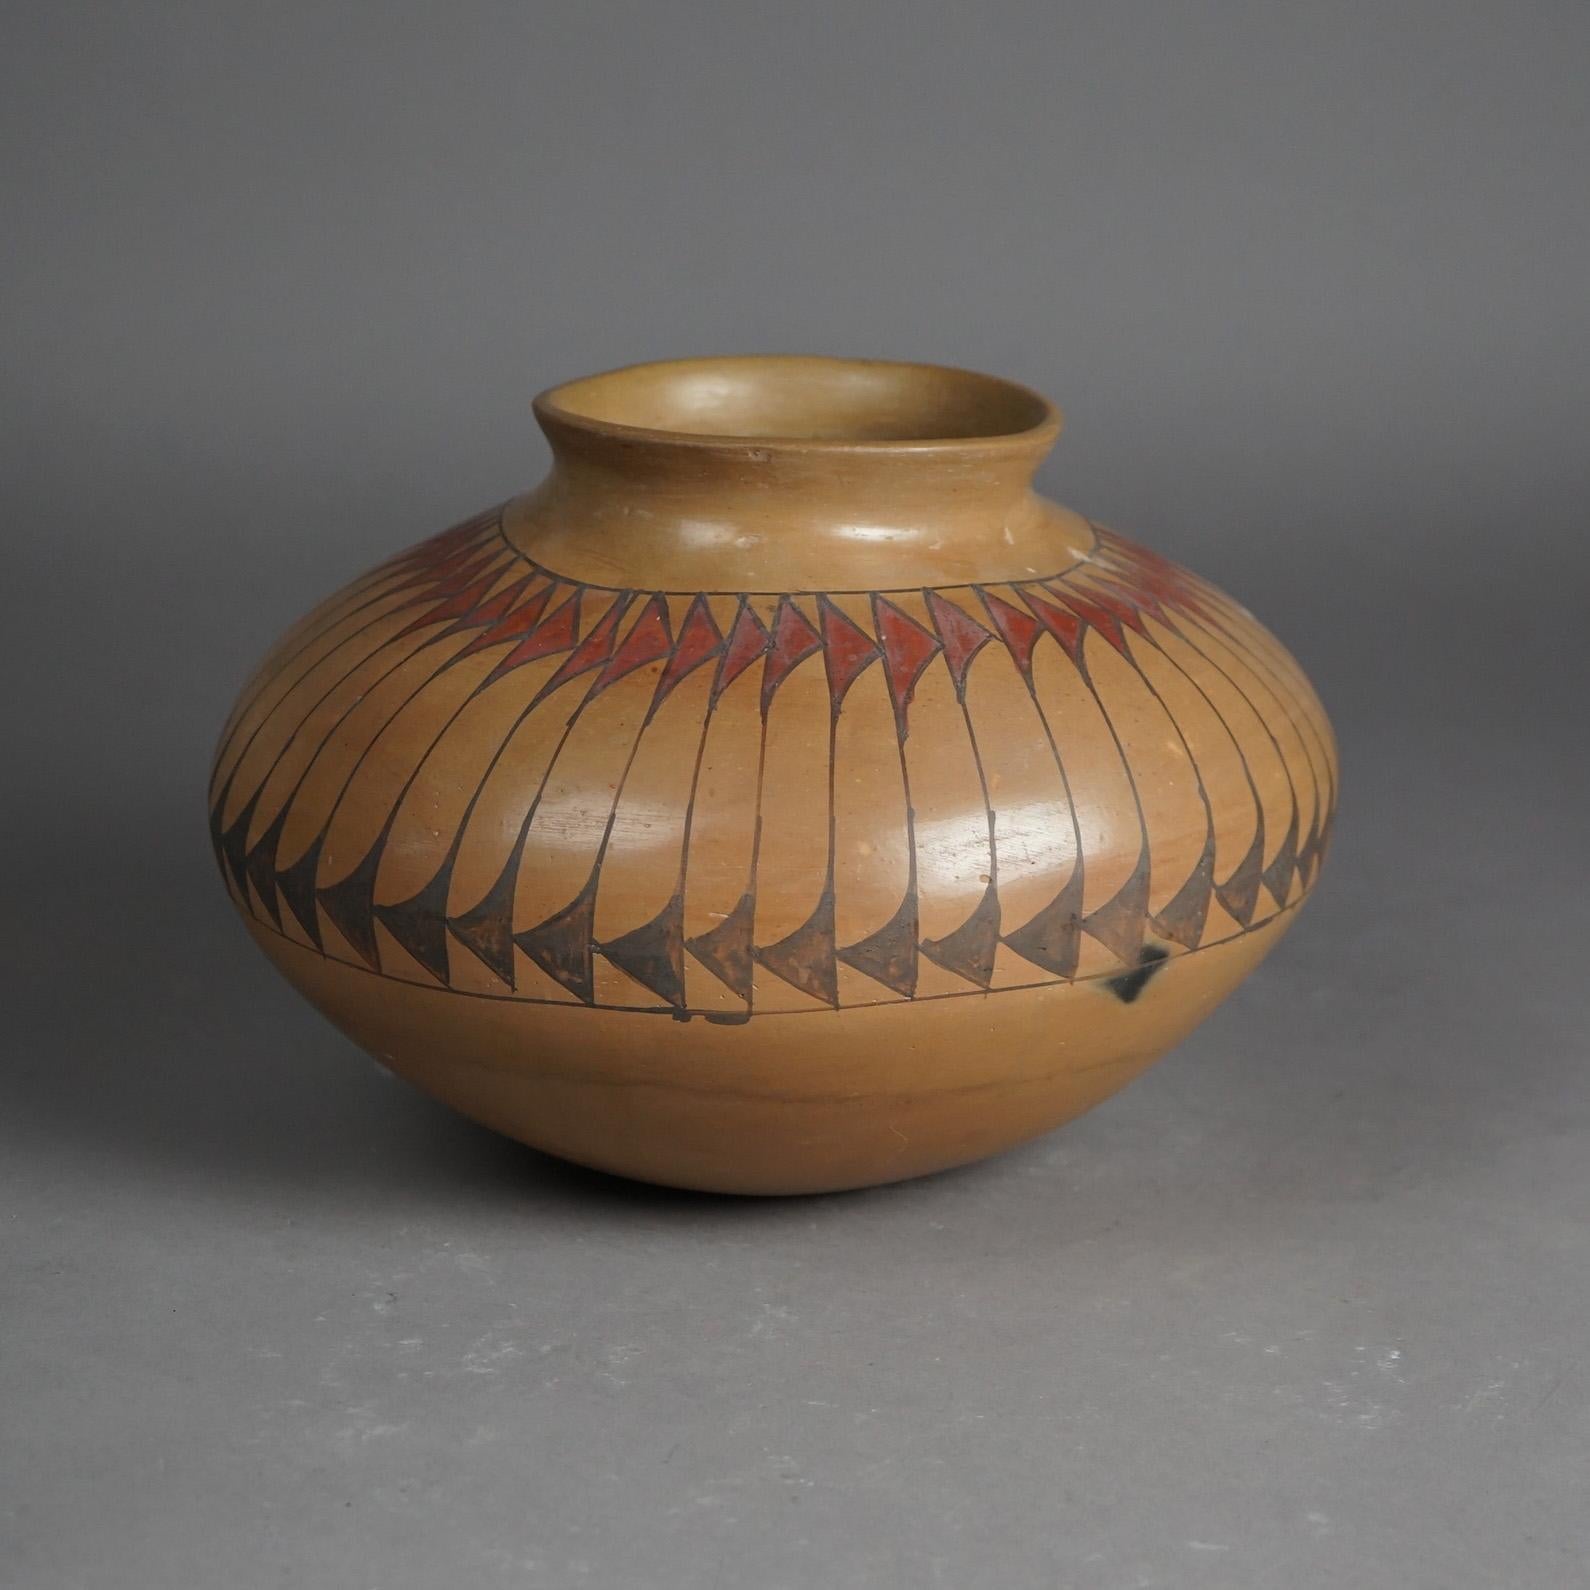 An antique Southwestern American Indian Taos Acoma olla offers pottery construction with stylized feather band, c1930

Measures - 7.75